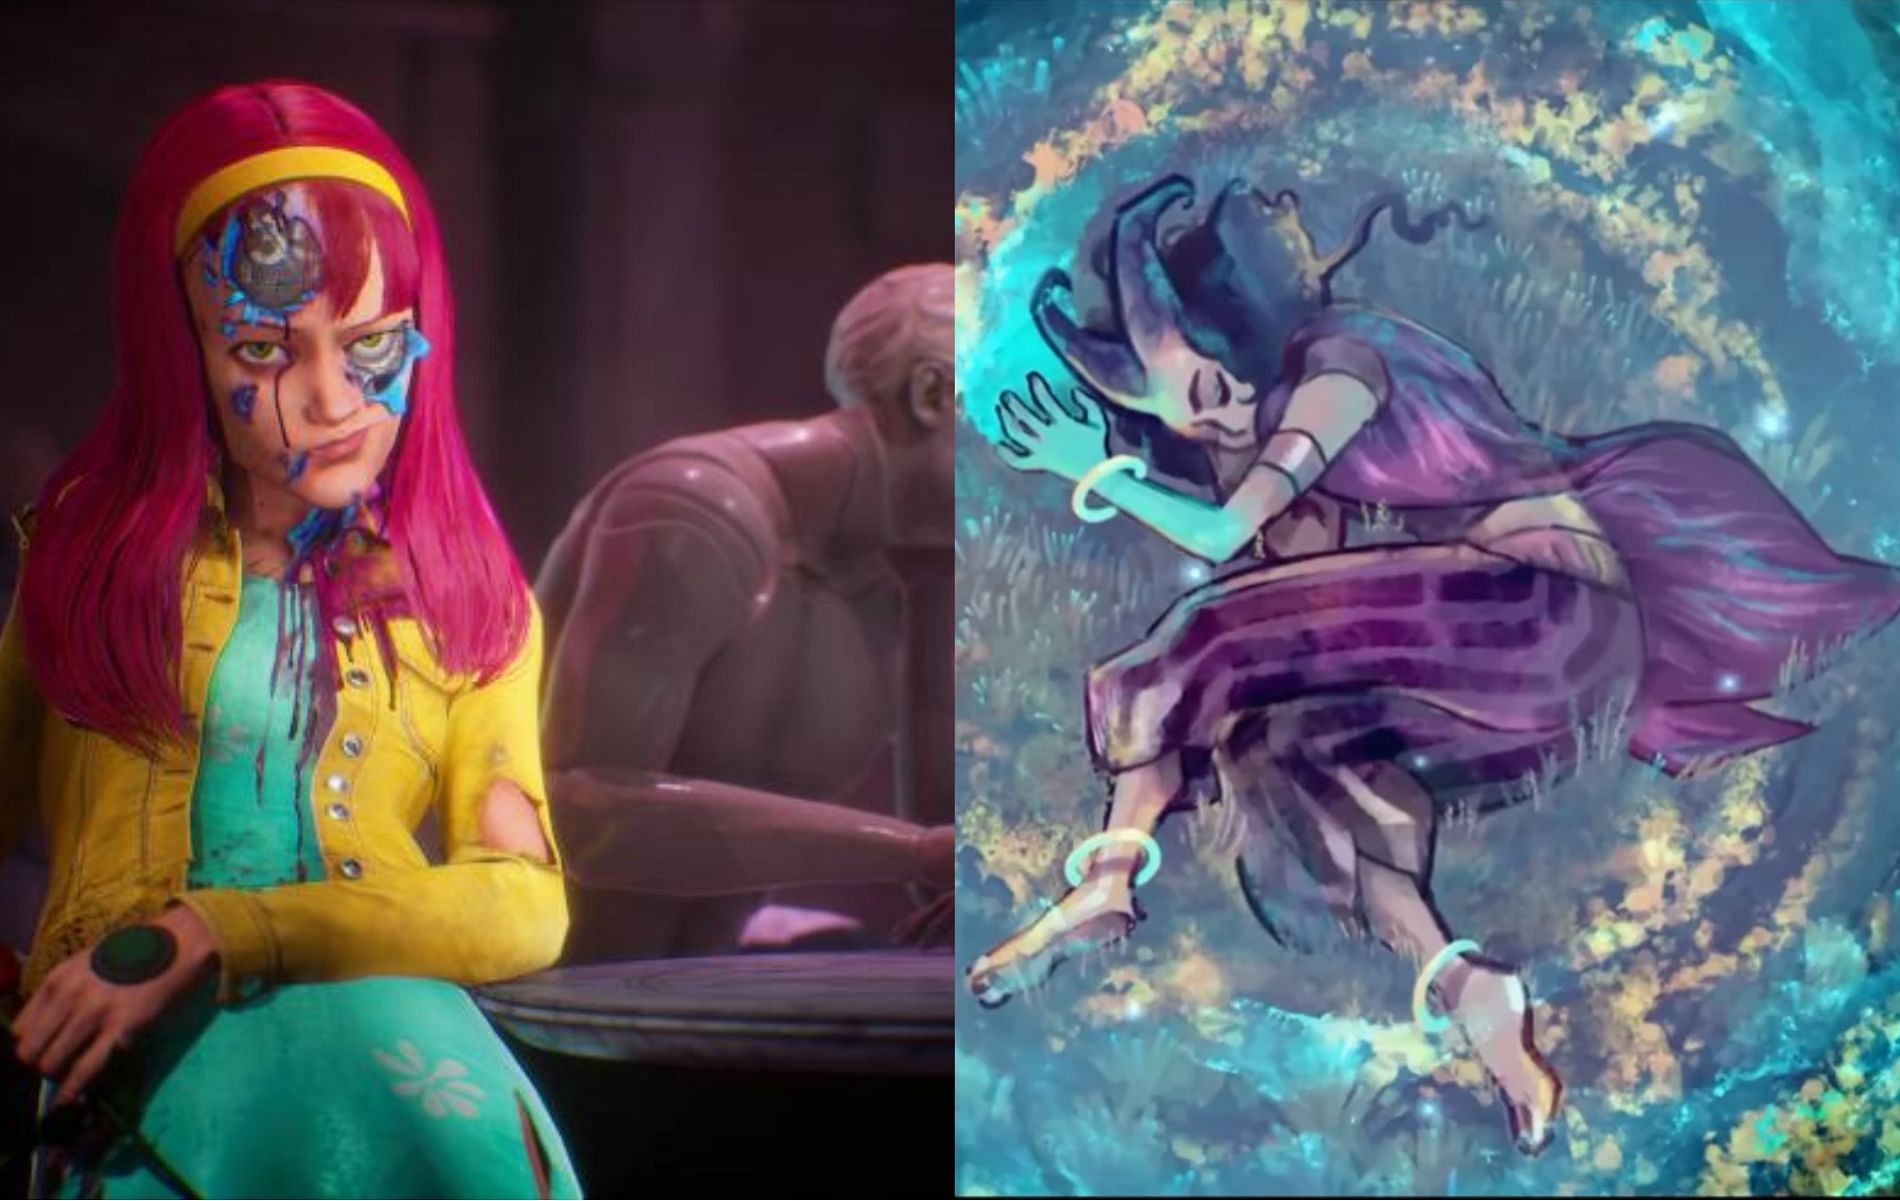 A sneak peek at some fresh new video games showcased at The Game Awards 2022 (Images via The Game Awards 2022/ You Tube)